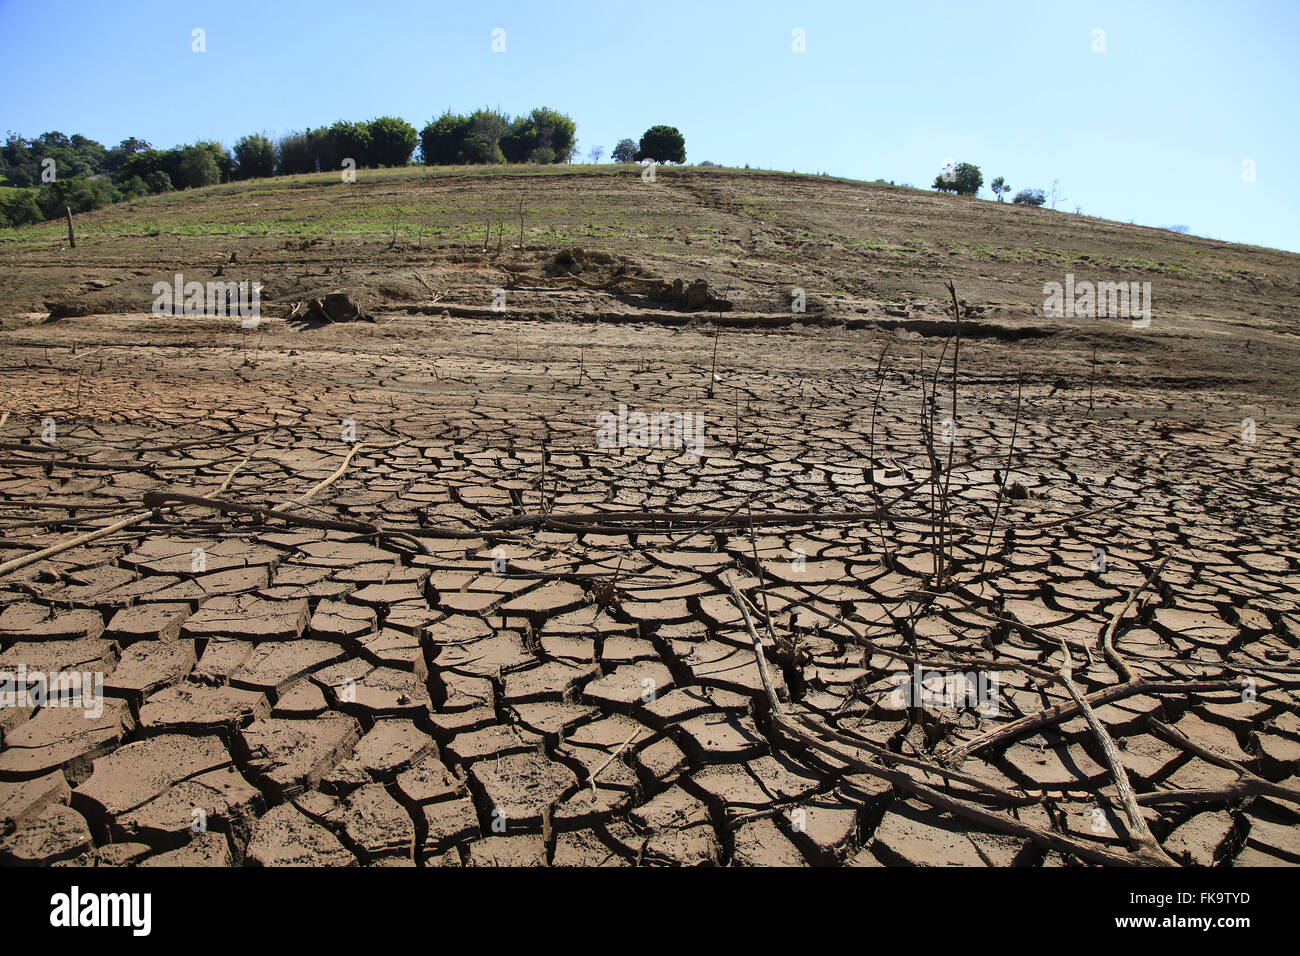 Cracked soil of the dam formed by Jaguari Jacarei and rivers during severe drought Stock Photo